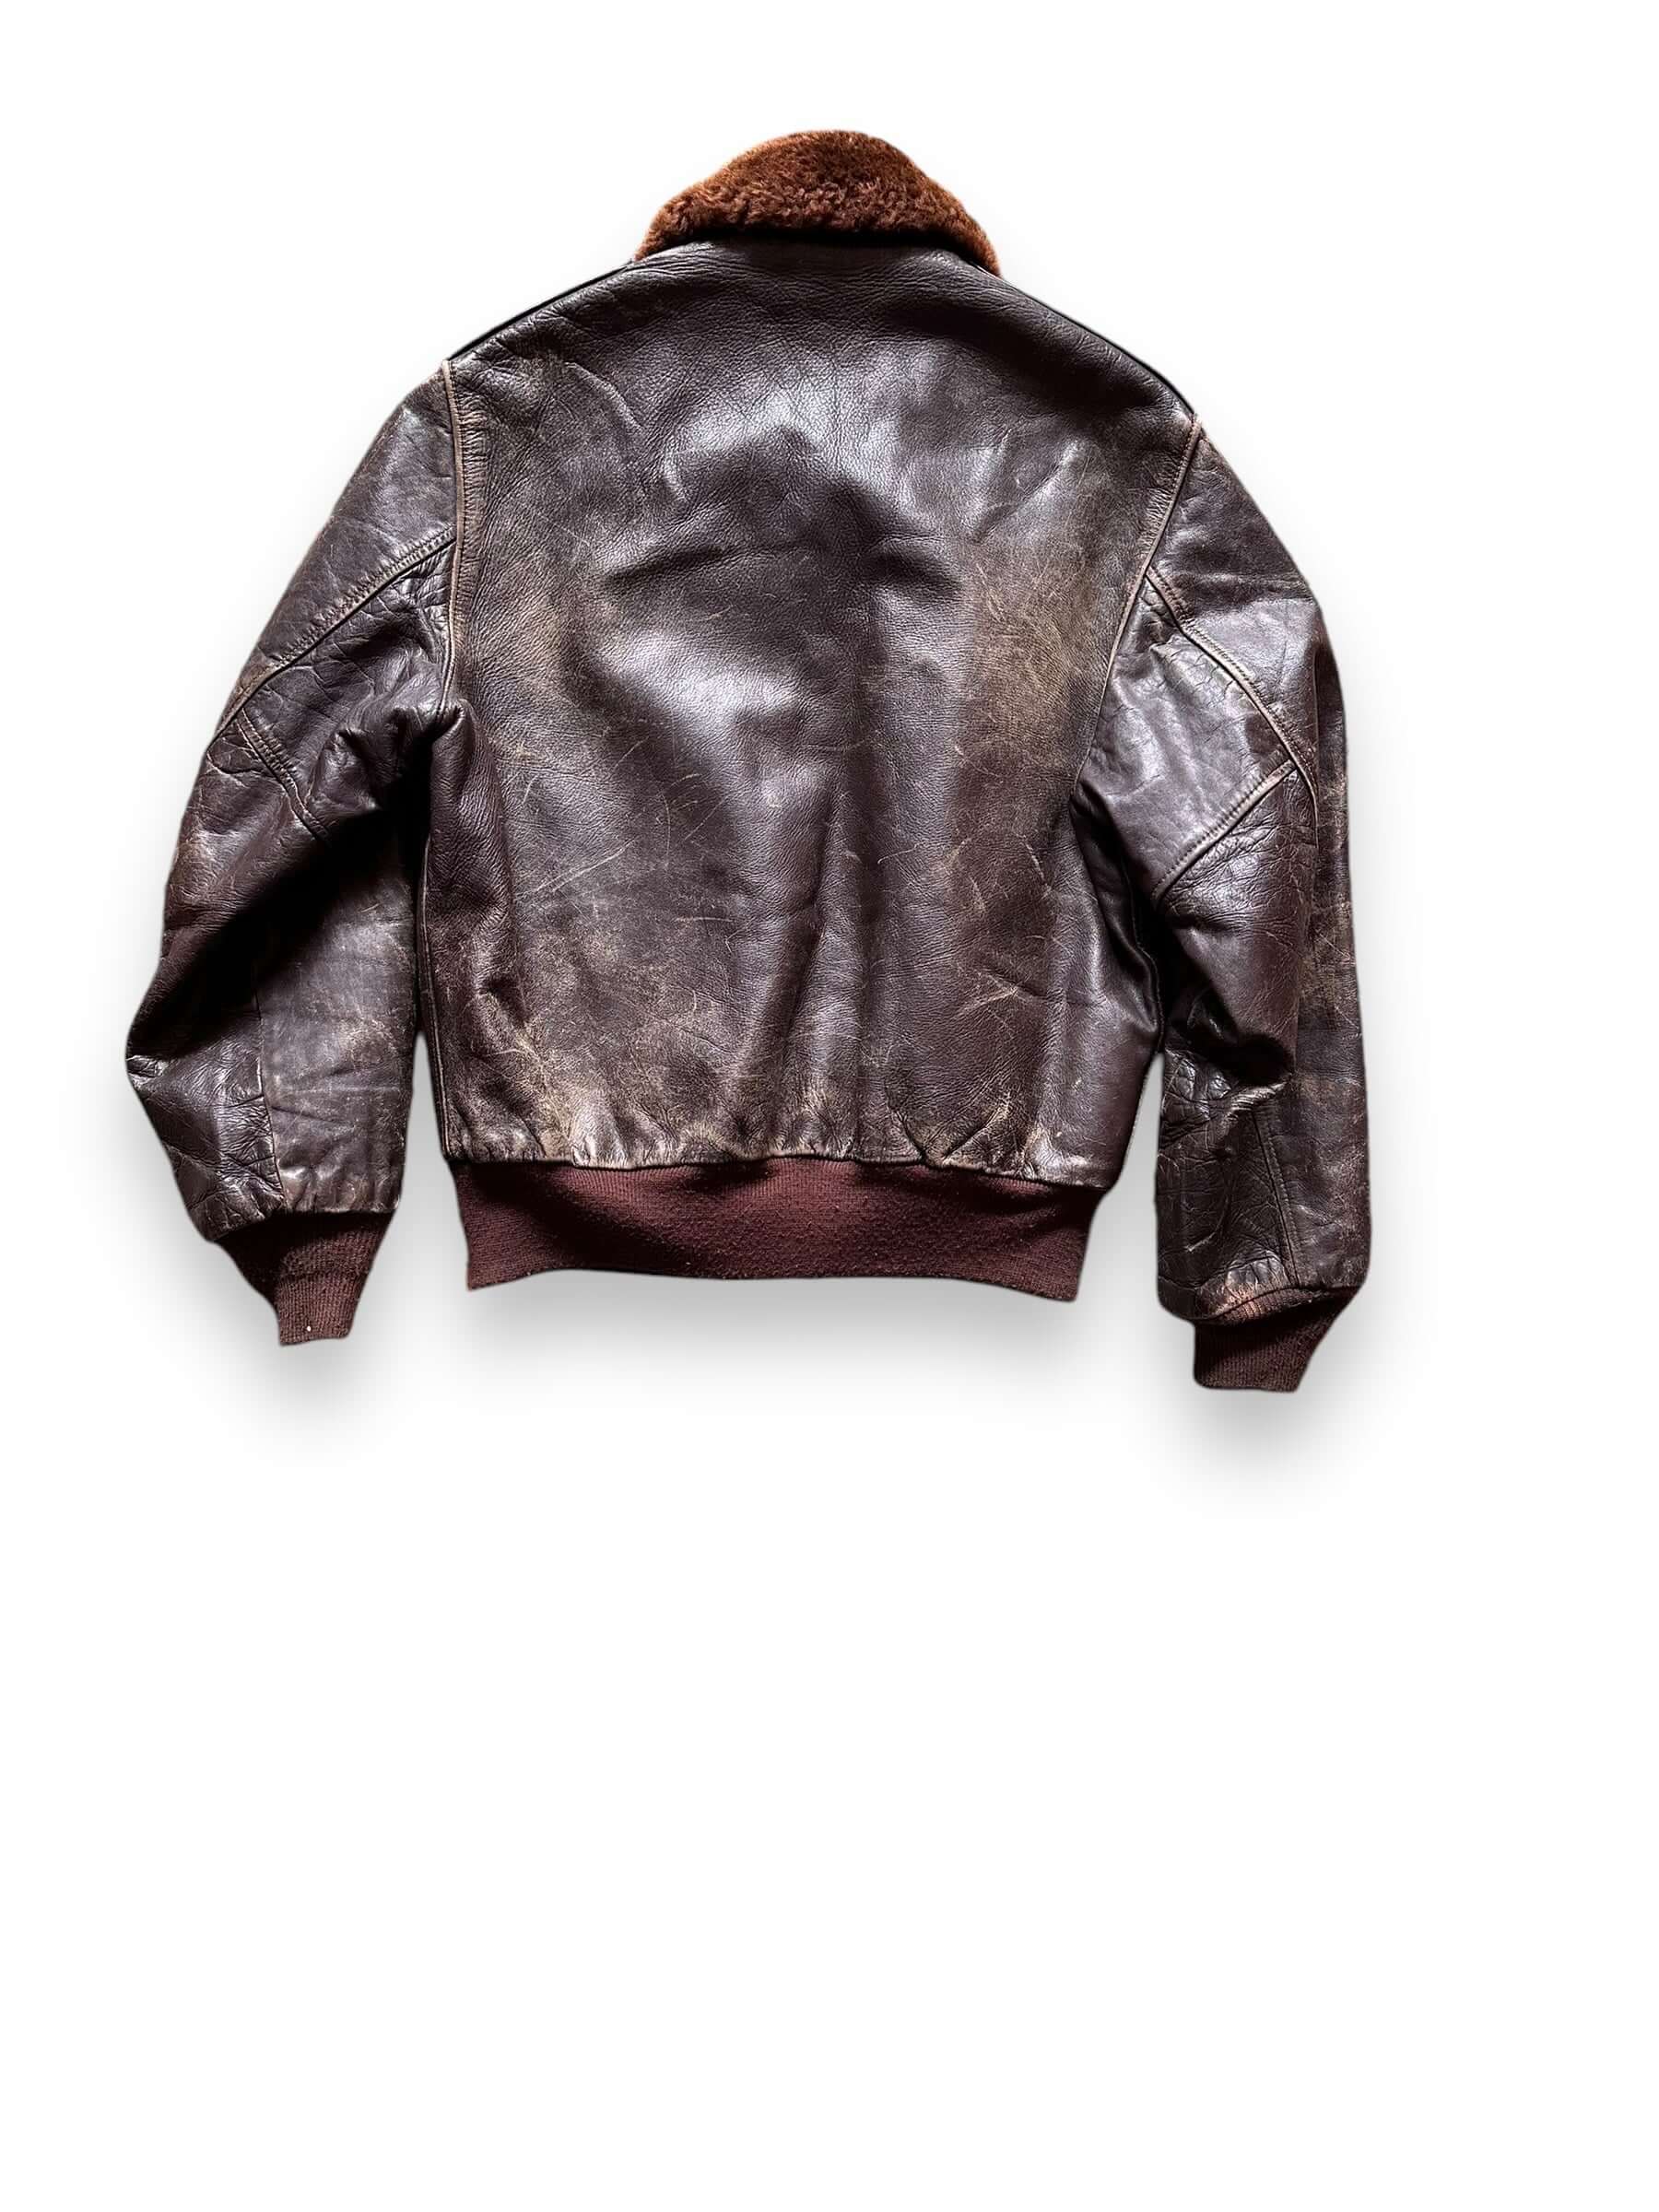 Rear View of Vintage Brent Shearling Leather Jacket SZ M | Vintage Clothing Seattle